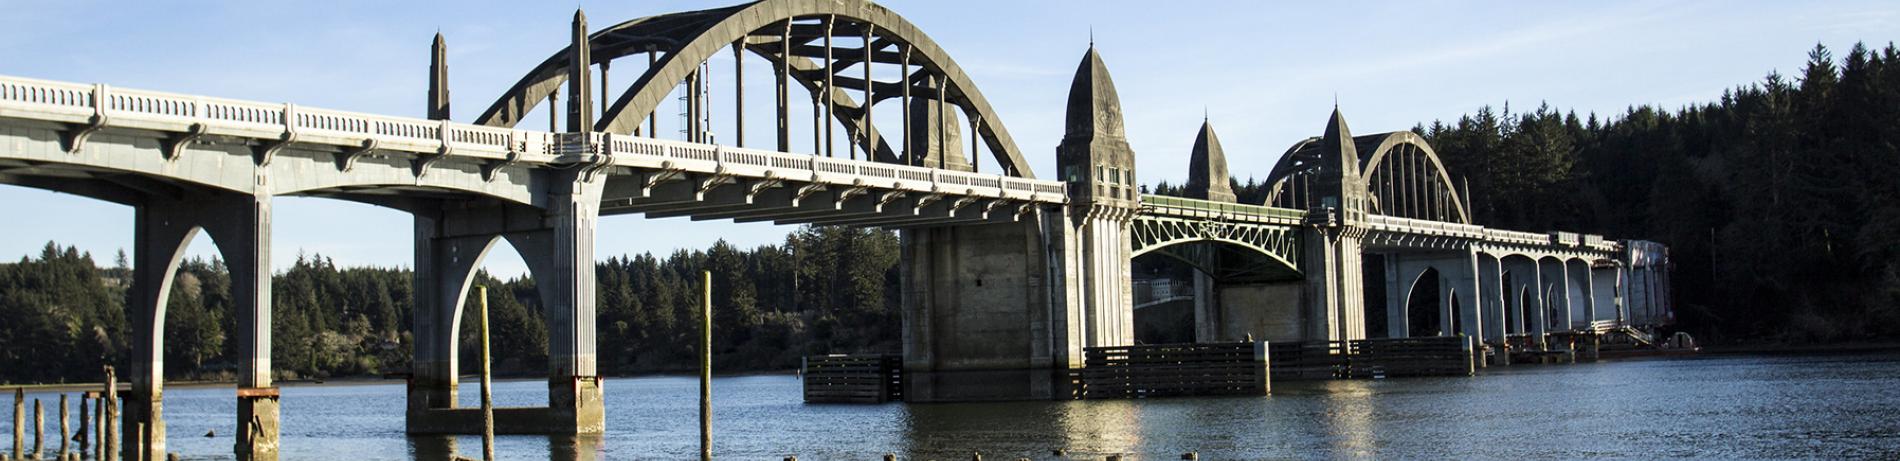 Image of the Siuslaw River Bridge, in Florence, Oregon